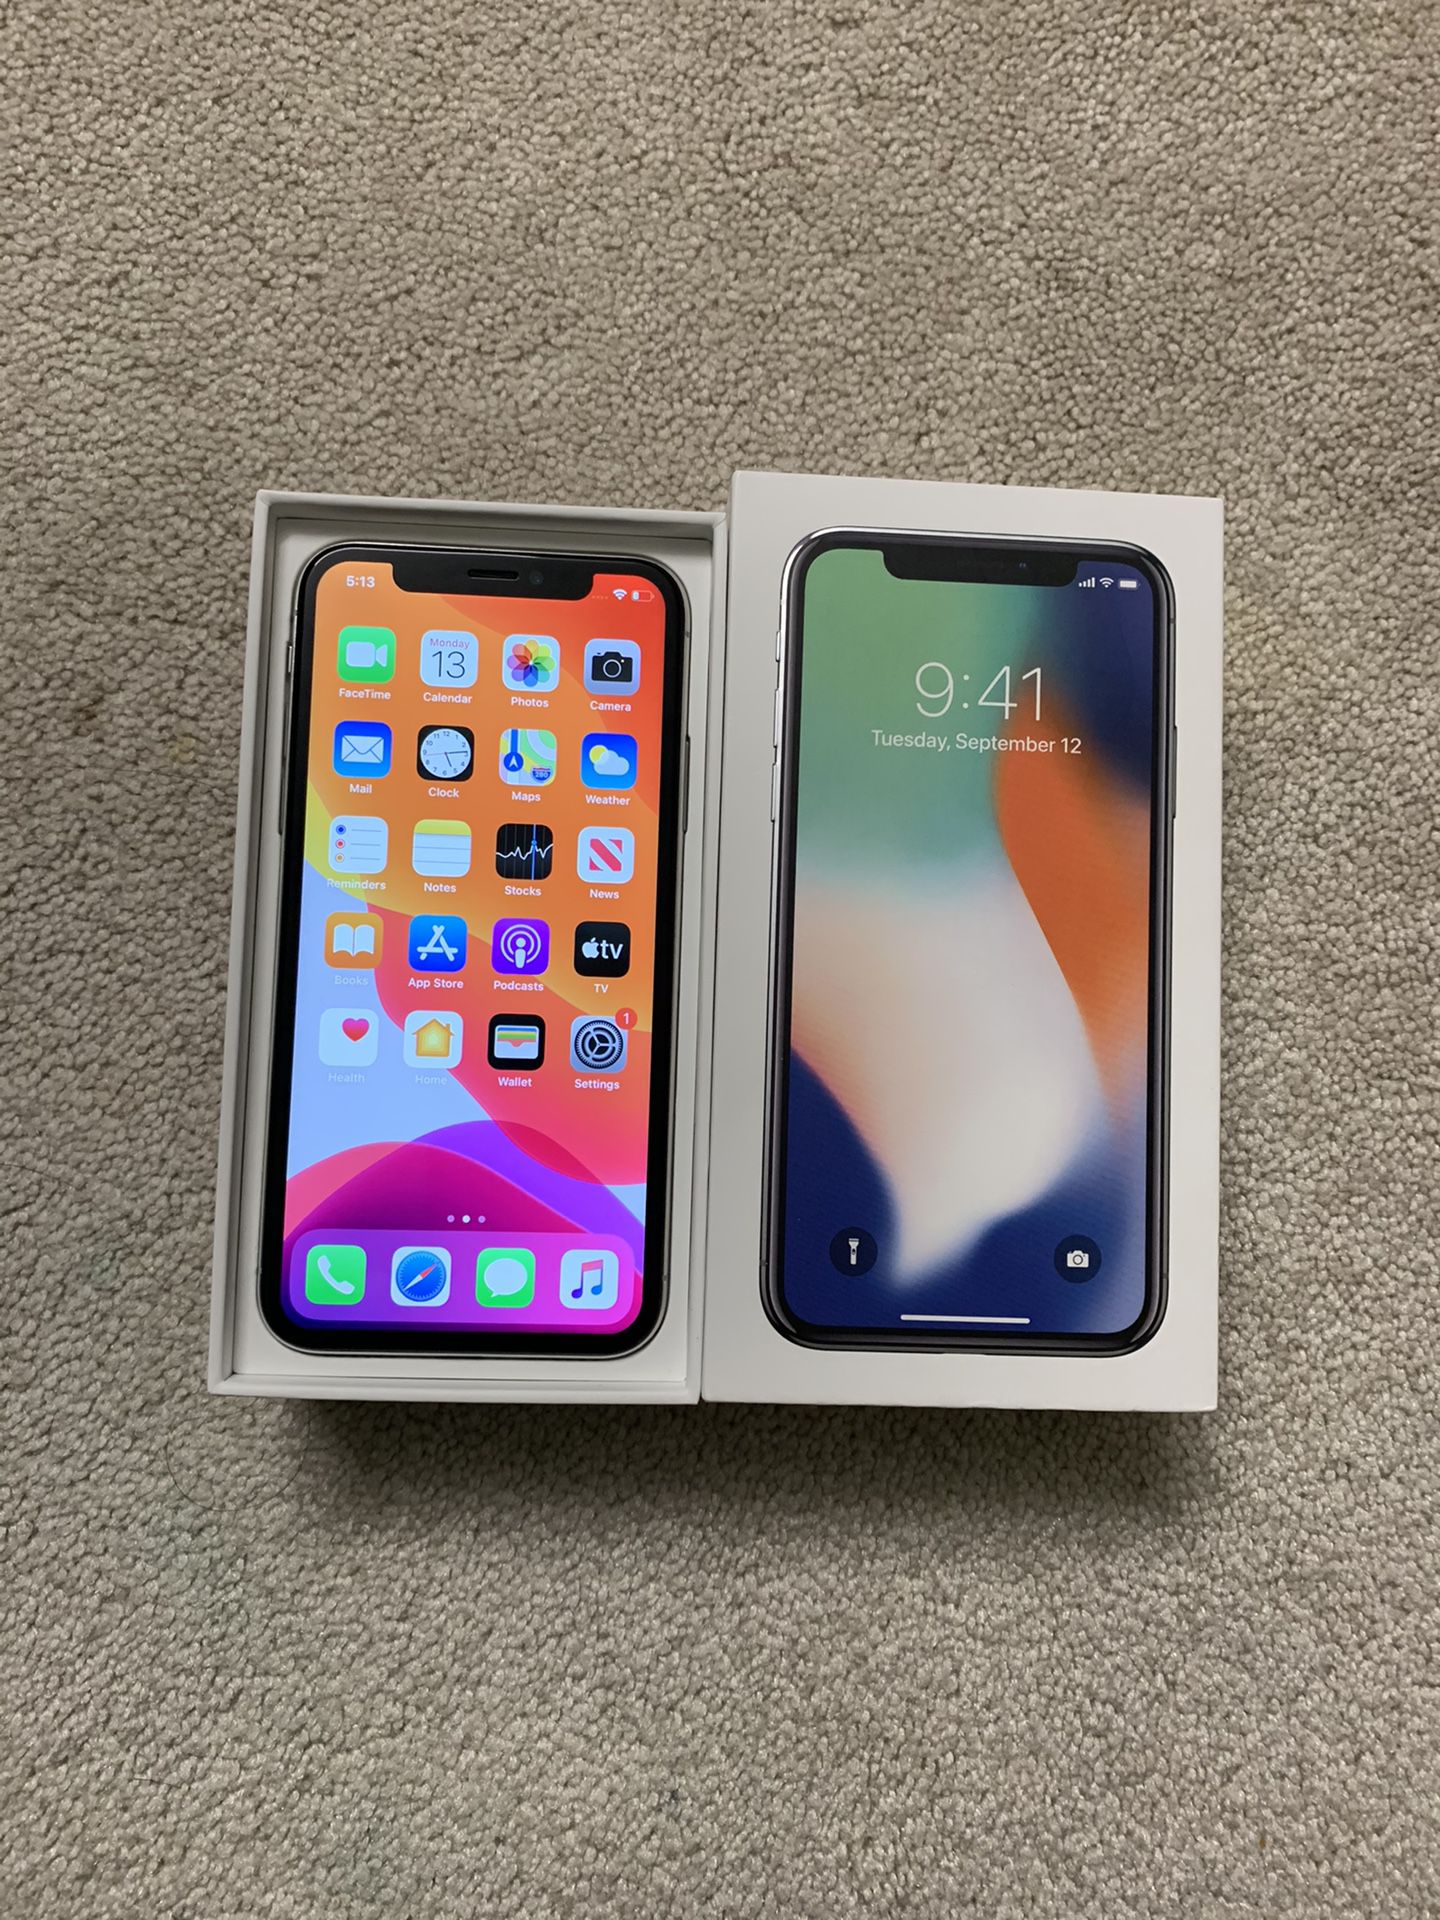 iPhone X 64gb Unlocked , Nothing wrong with it. And no damage, good condition for sale $500 thanks